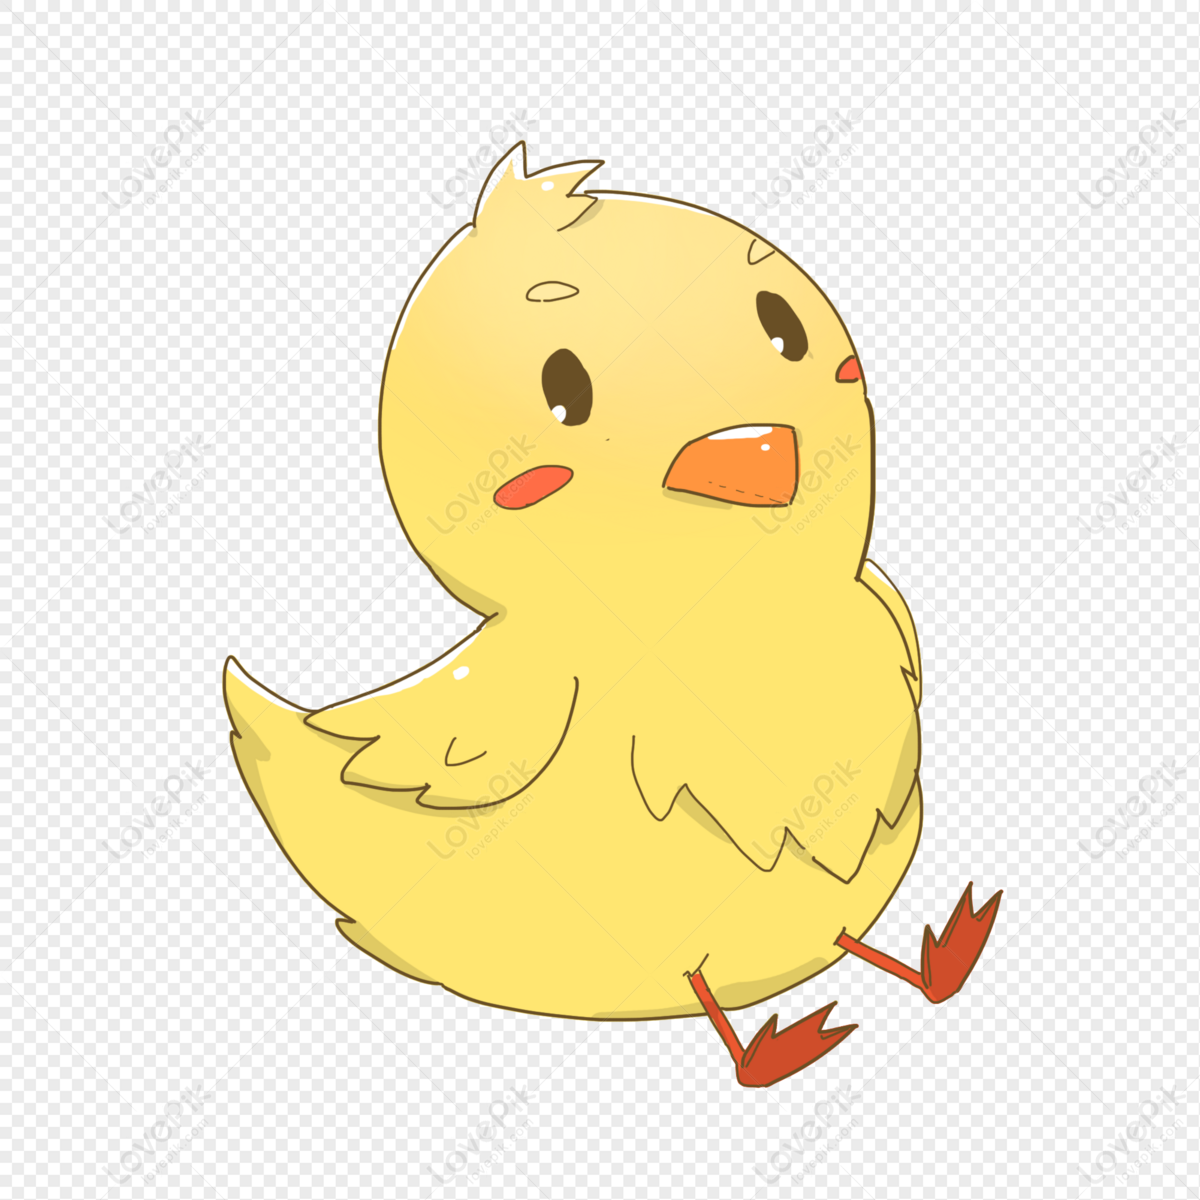 Cute Chick PNG Images With Transparent Background | Free Download ...